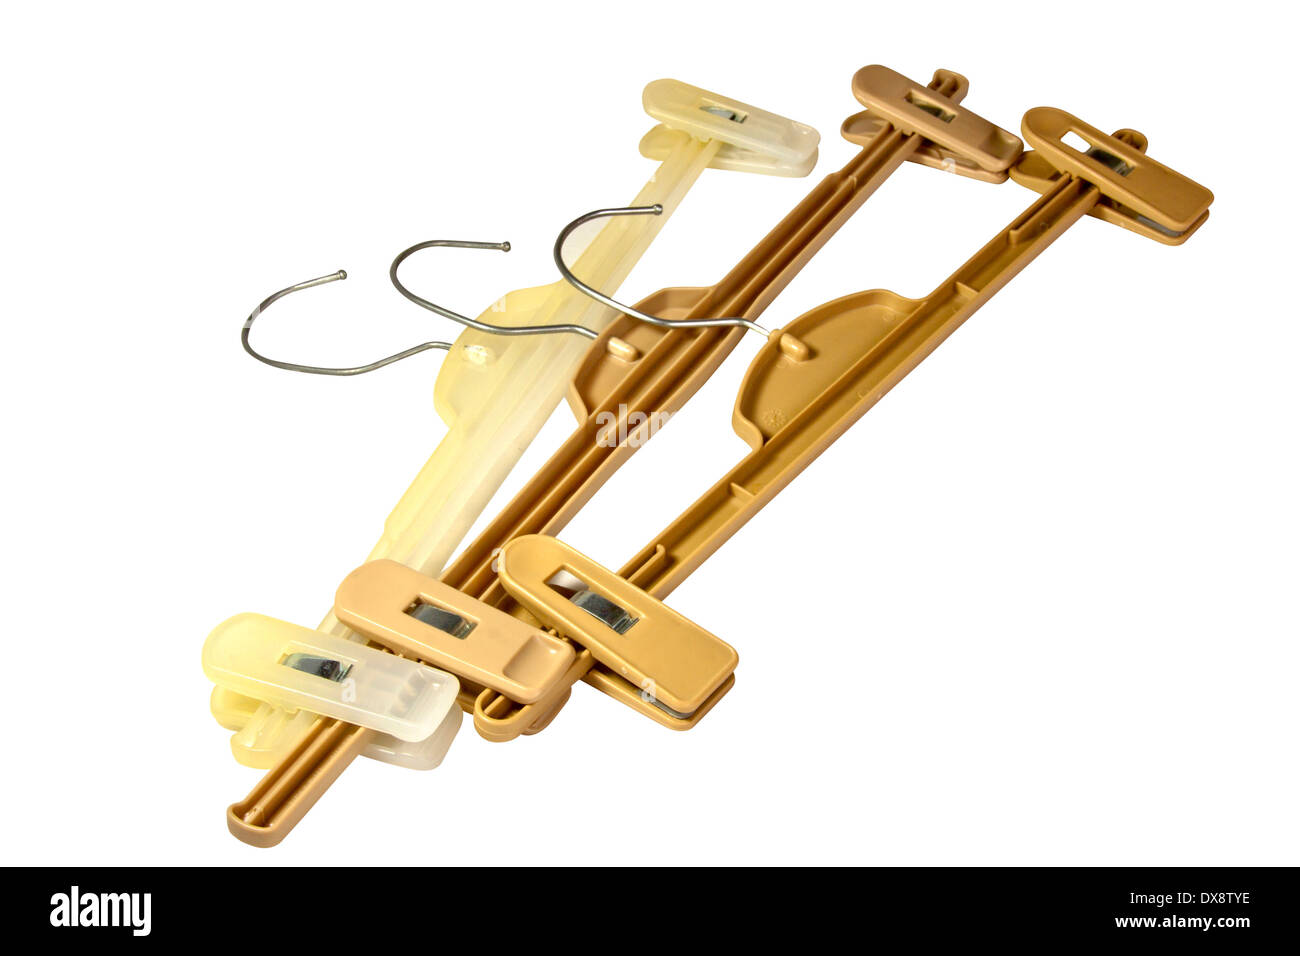 Clothes hanger hooks Cut Out Stock Images & Pictures - Alamy